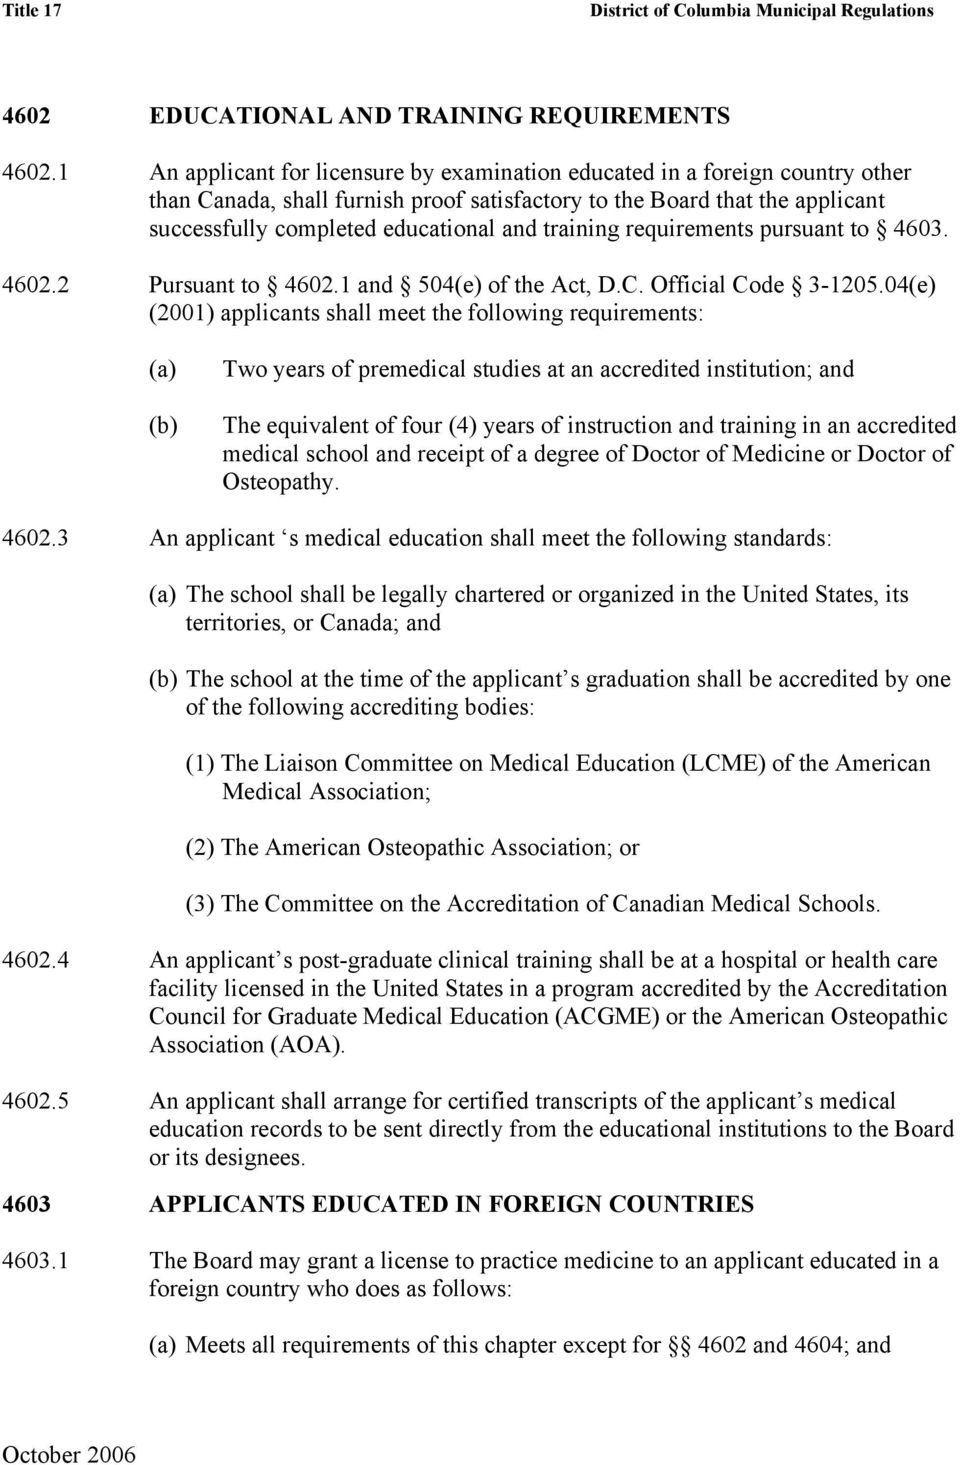 training requirements pursuant to 4603. 4602.2 Pursuant to 4602.1 and 504(e) of the Act, D.C. Official Code 3-1205.